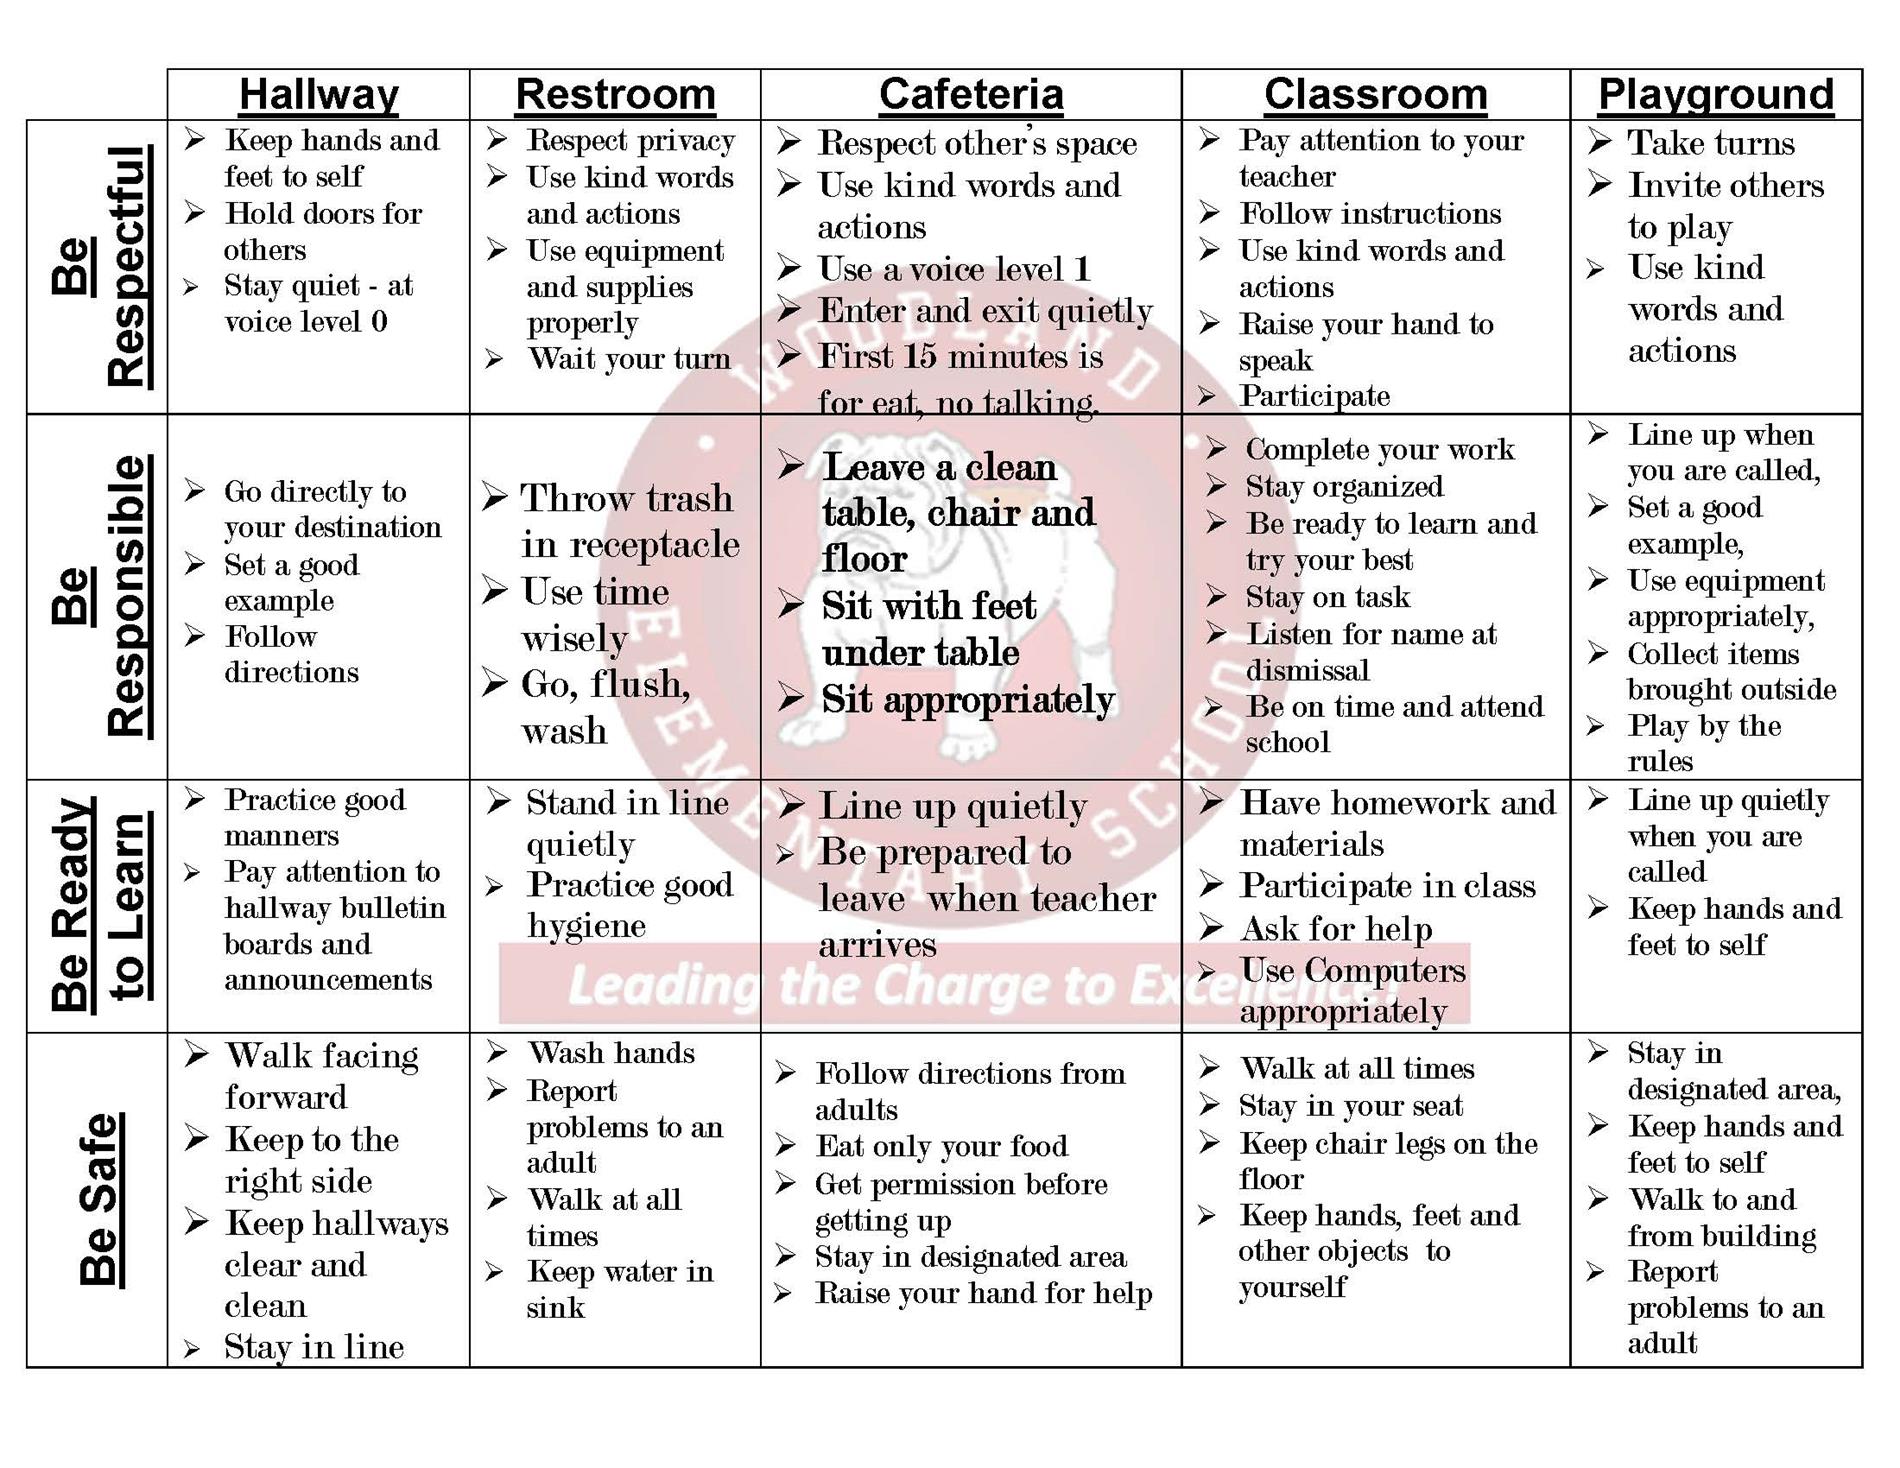 PBIS Matrix. Be safe, Be ready to learn, be responsible, be respectful 